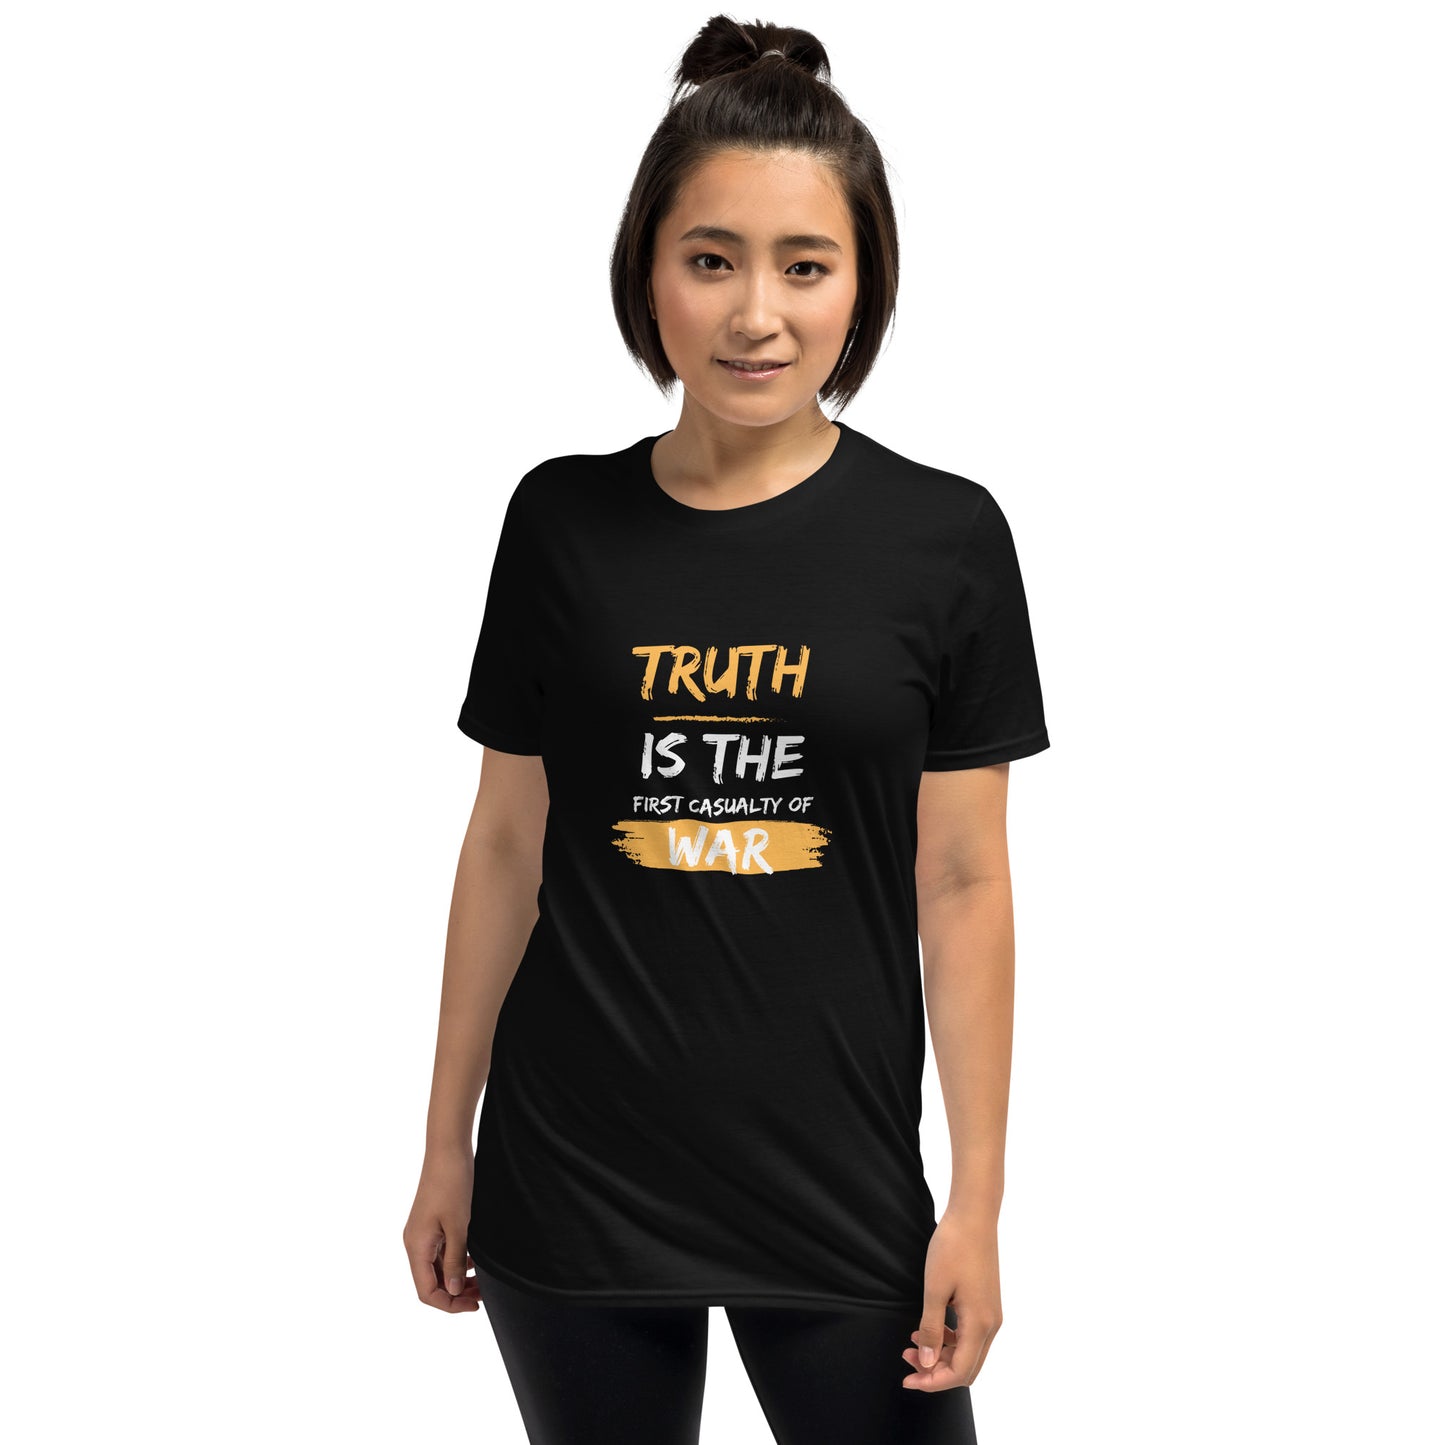 Challenging War Propaganda: Truth is the First Casualty of War T-Shirt